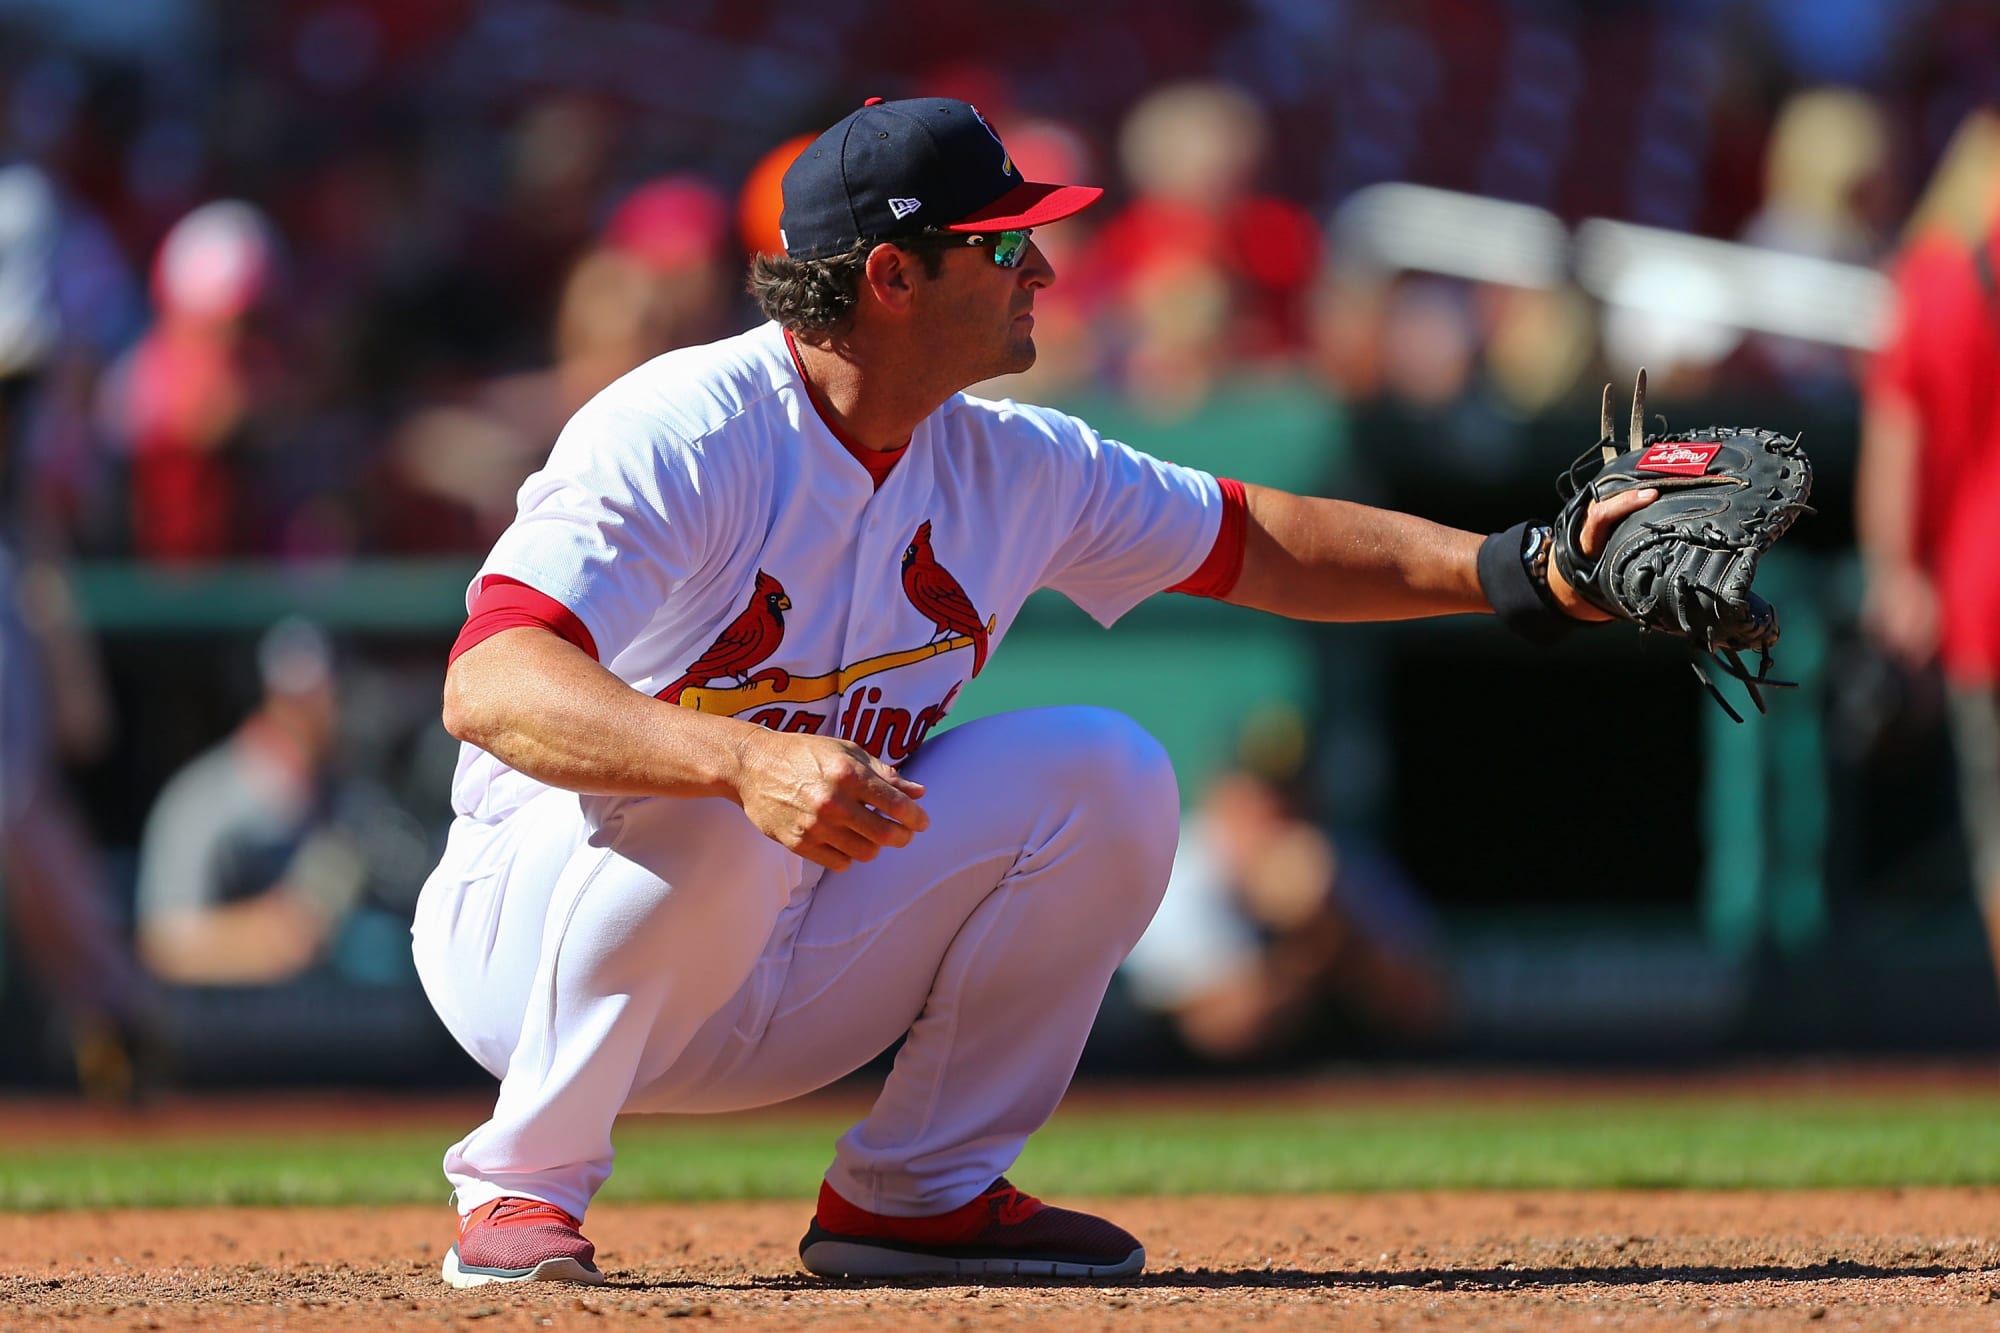 St. Louis Cardinals: Mike Matheny leads Cards to another winning season